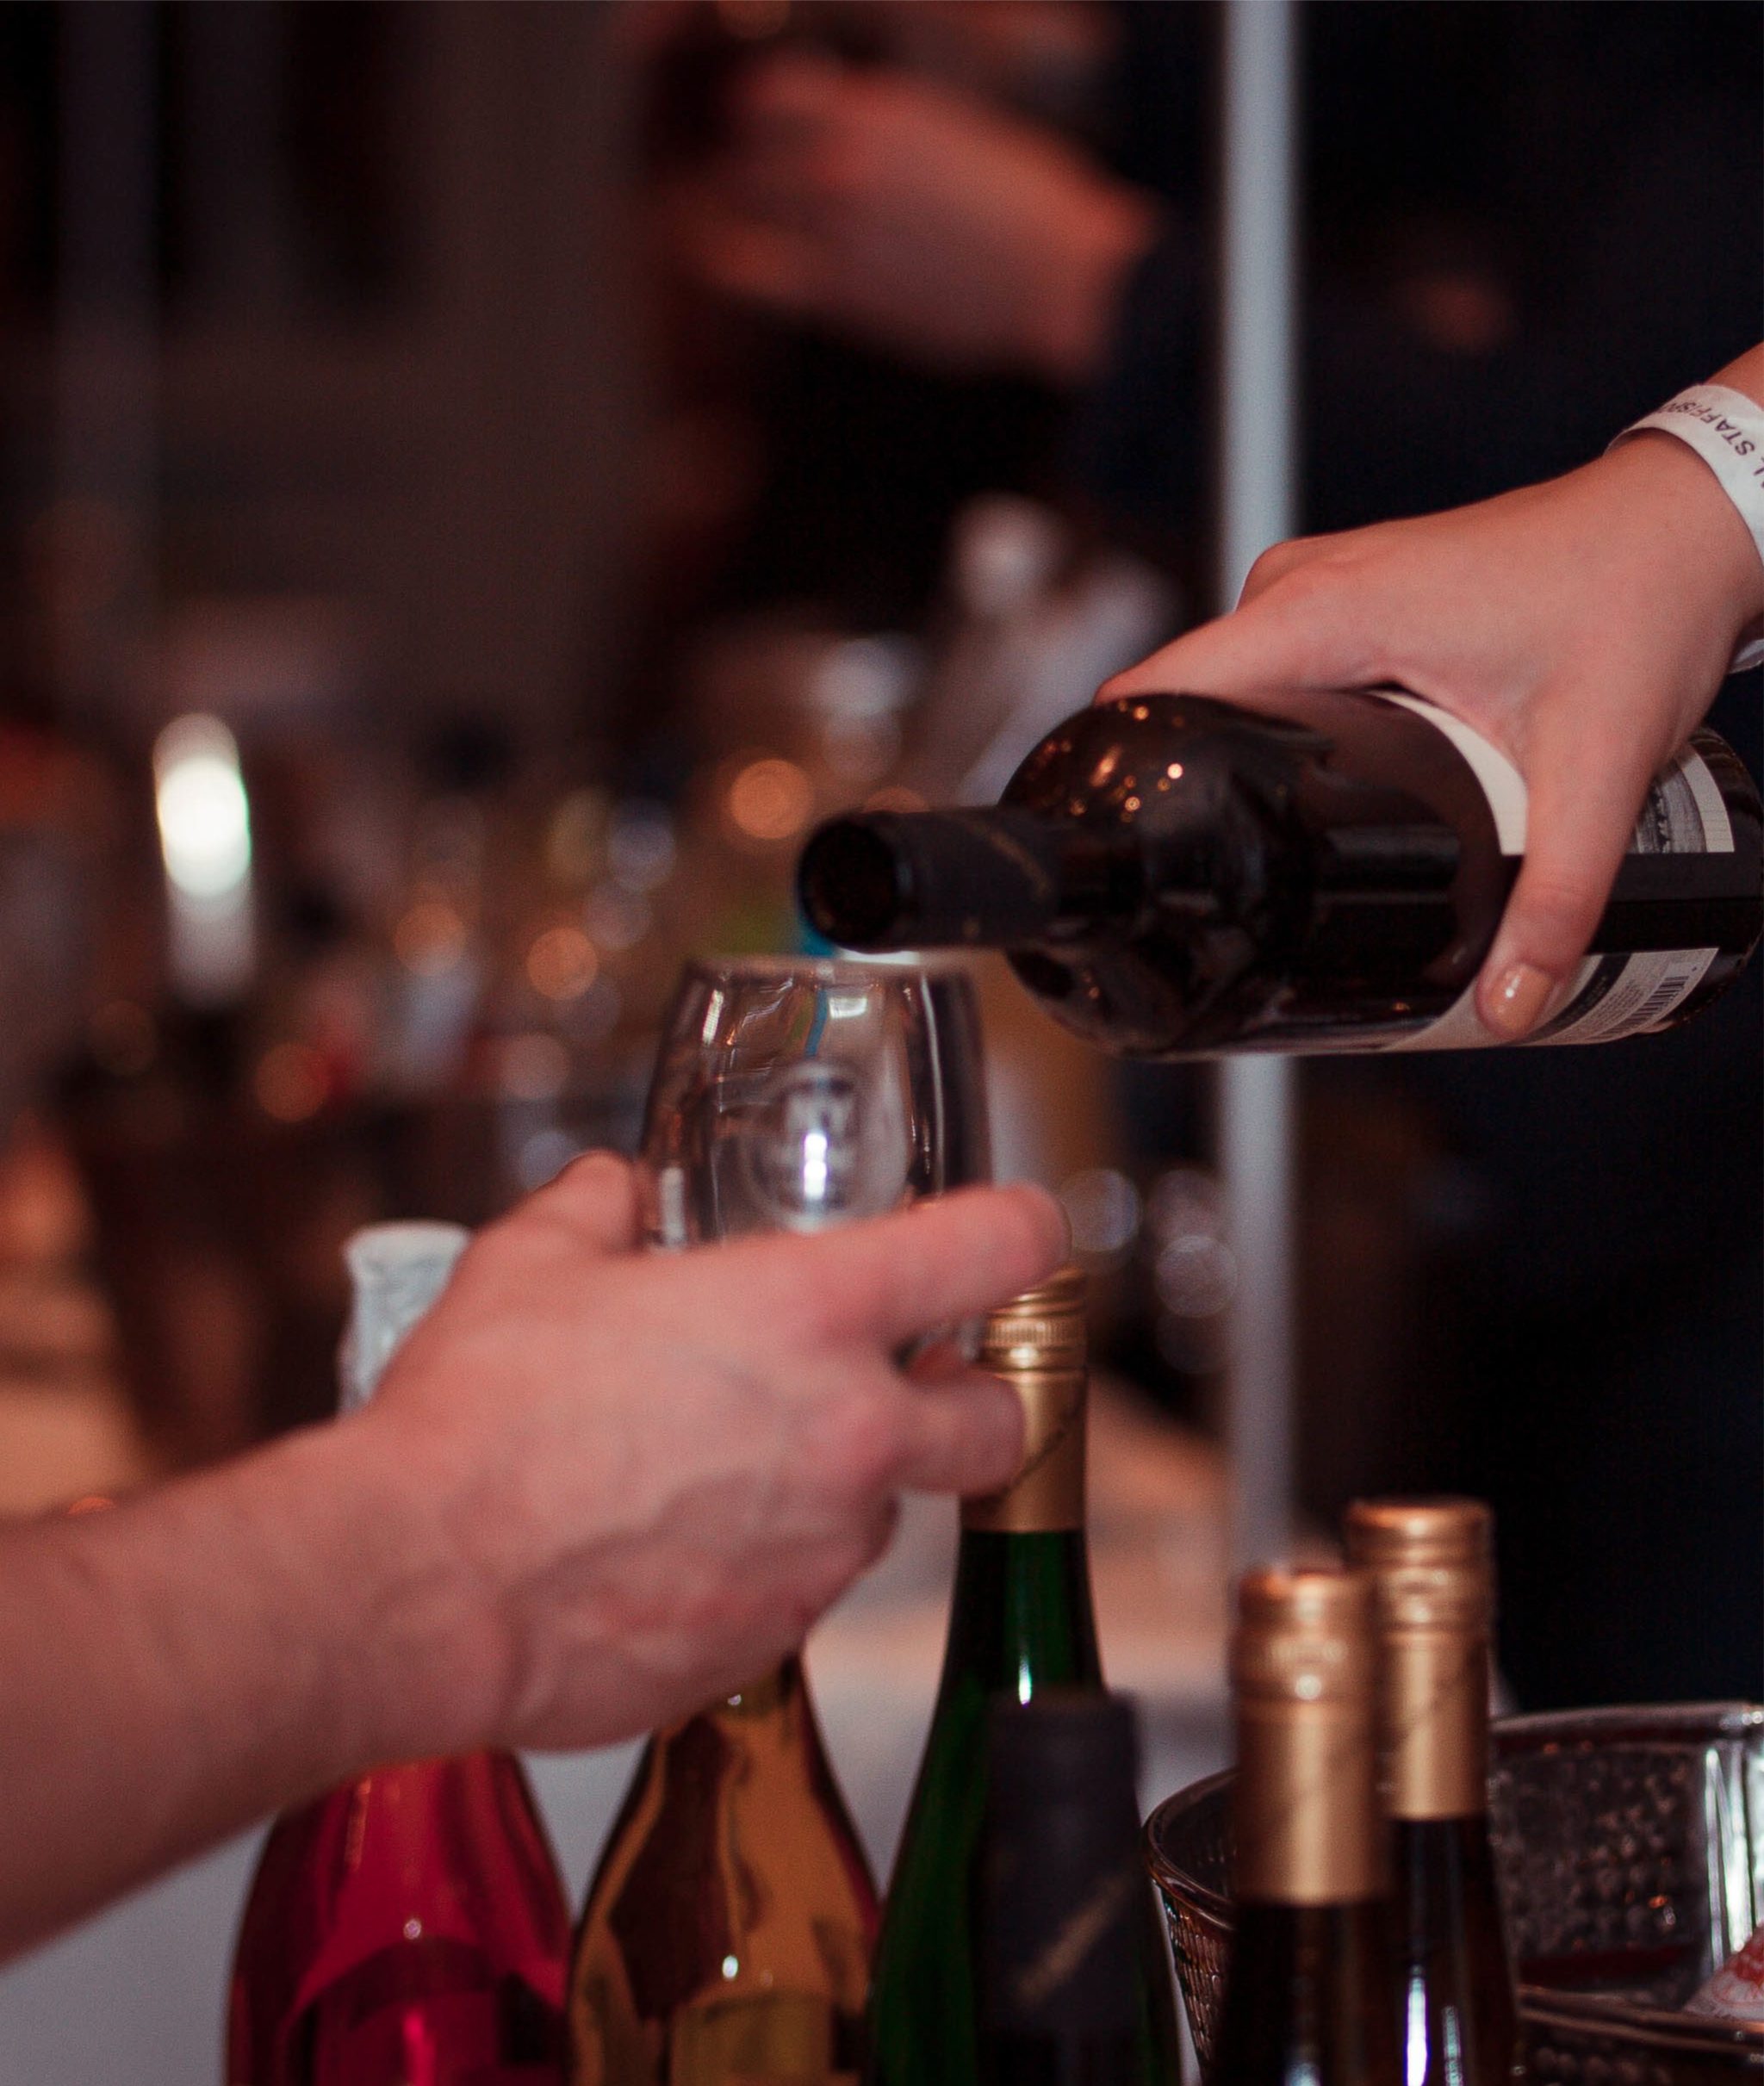 New York Wine Events hosts two NY Metro fall tasting events in November.